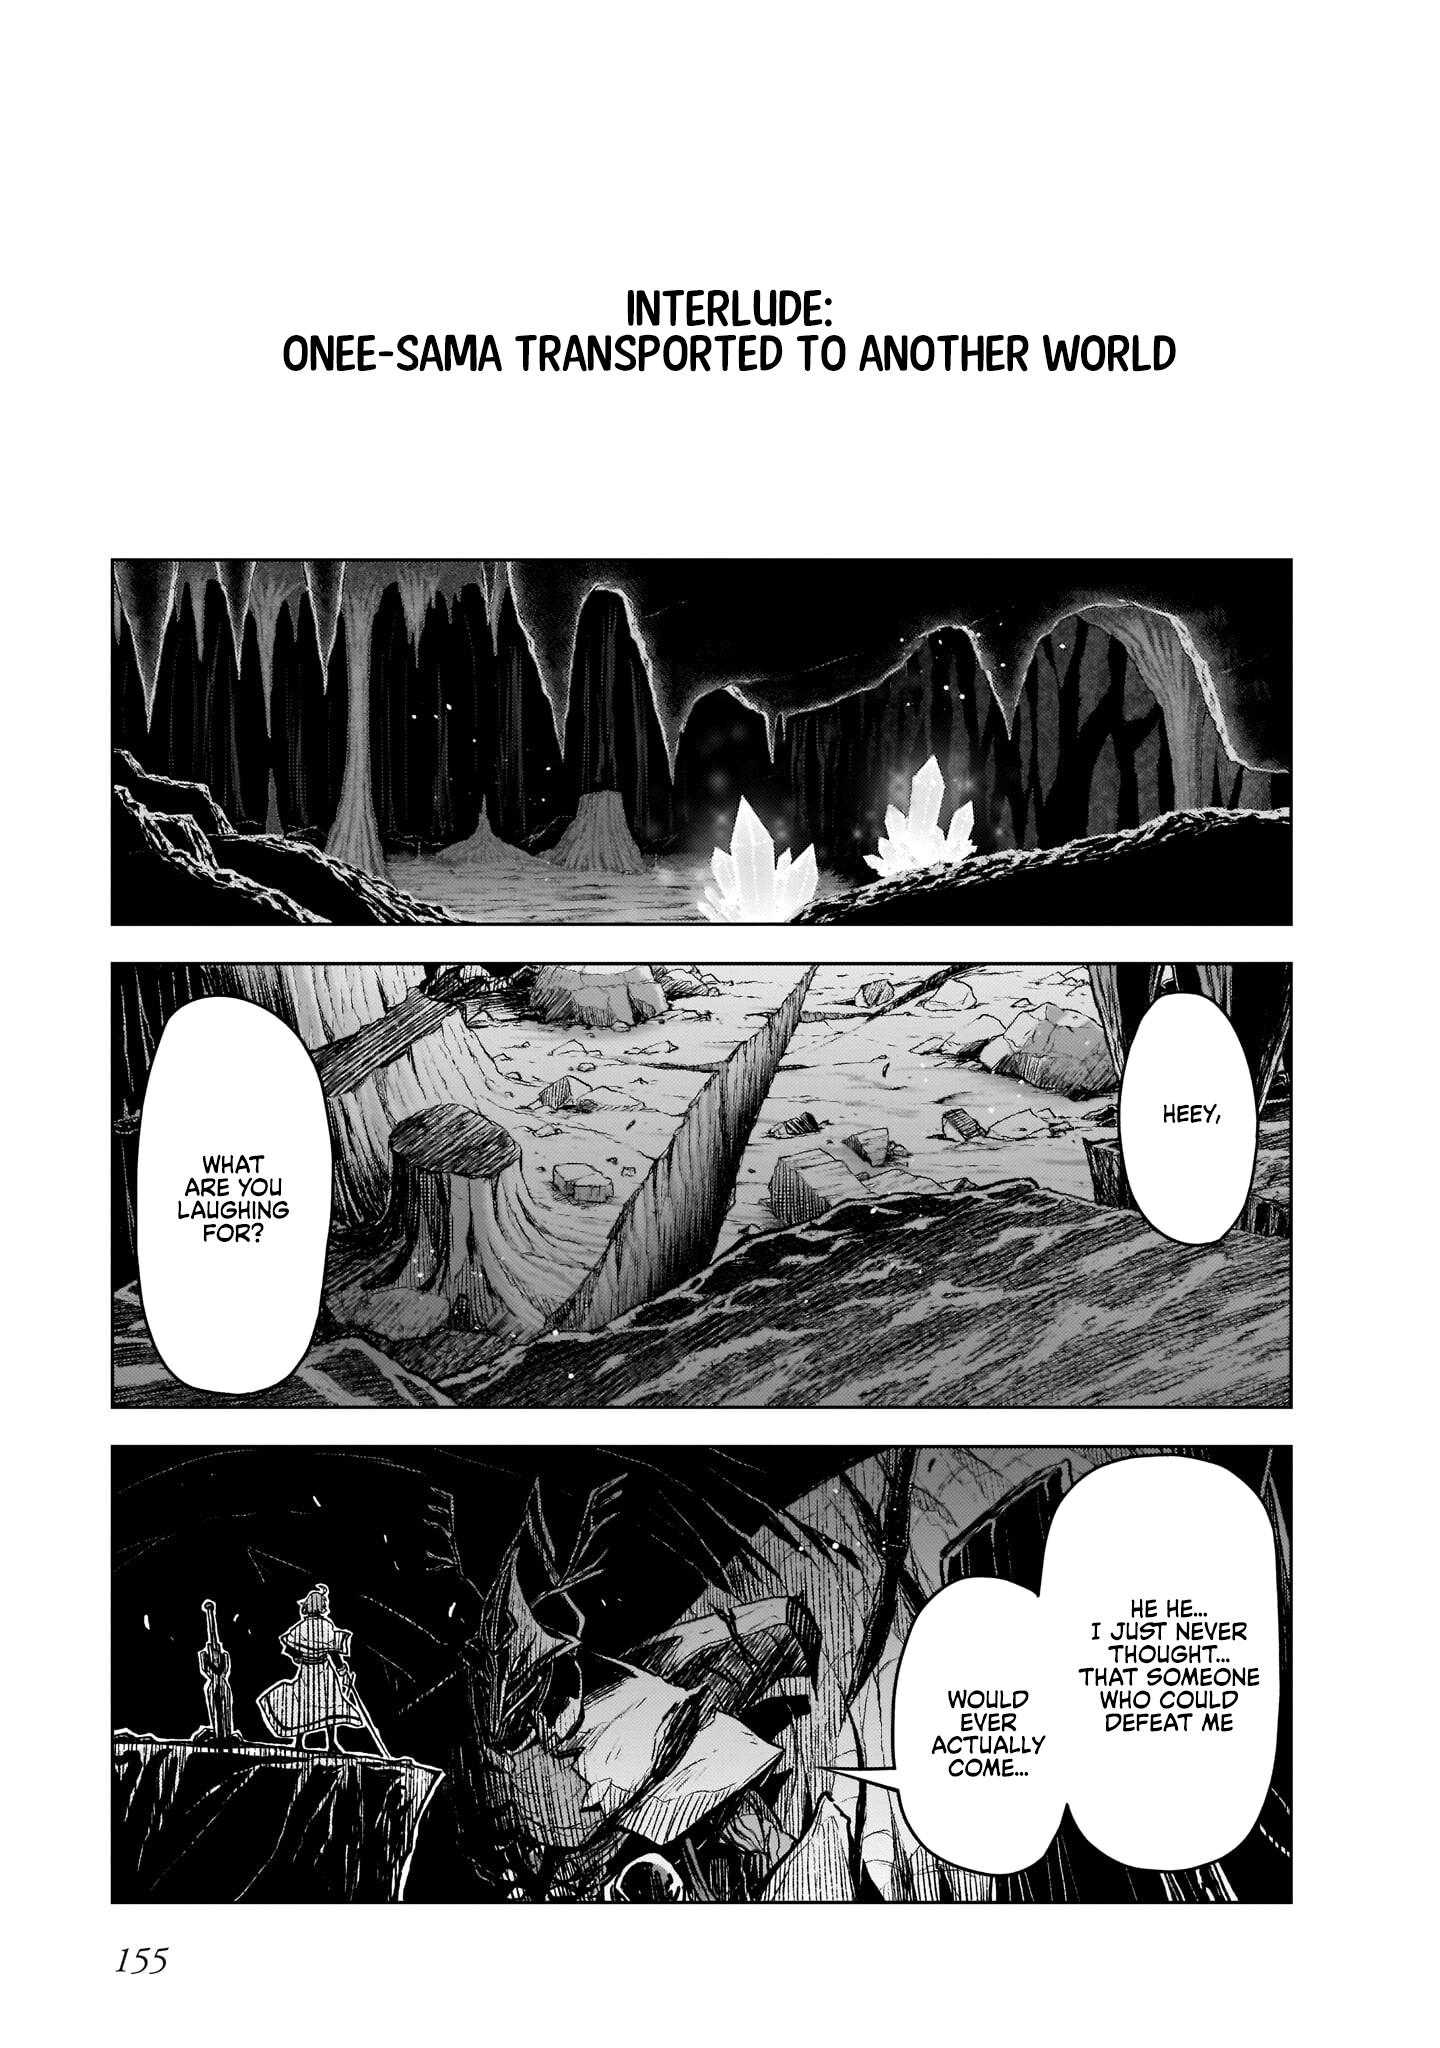 The Onee-Sama And The Giant Vol.1 Chapter 3.5: Interlude - Picture 1